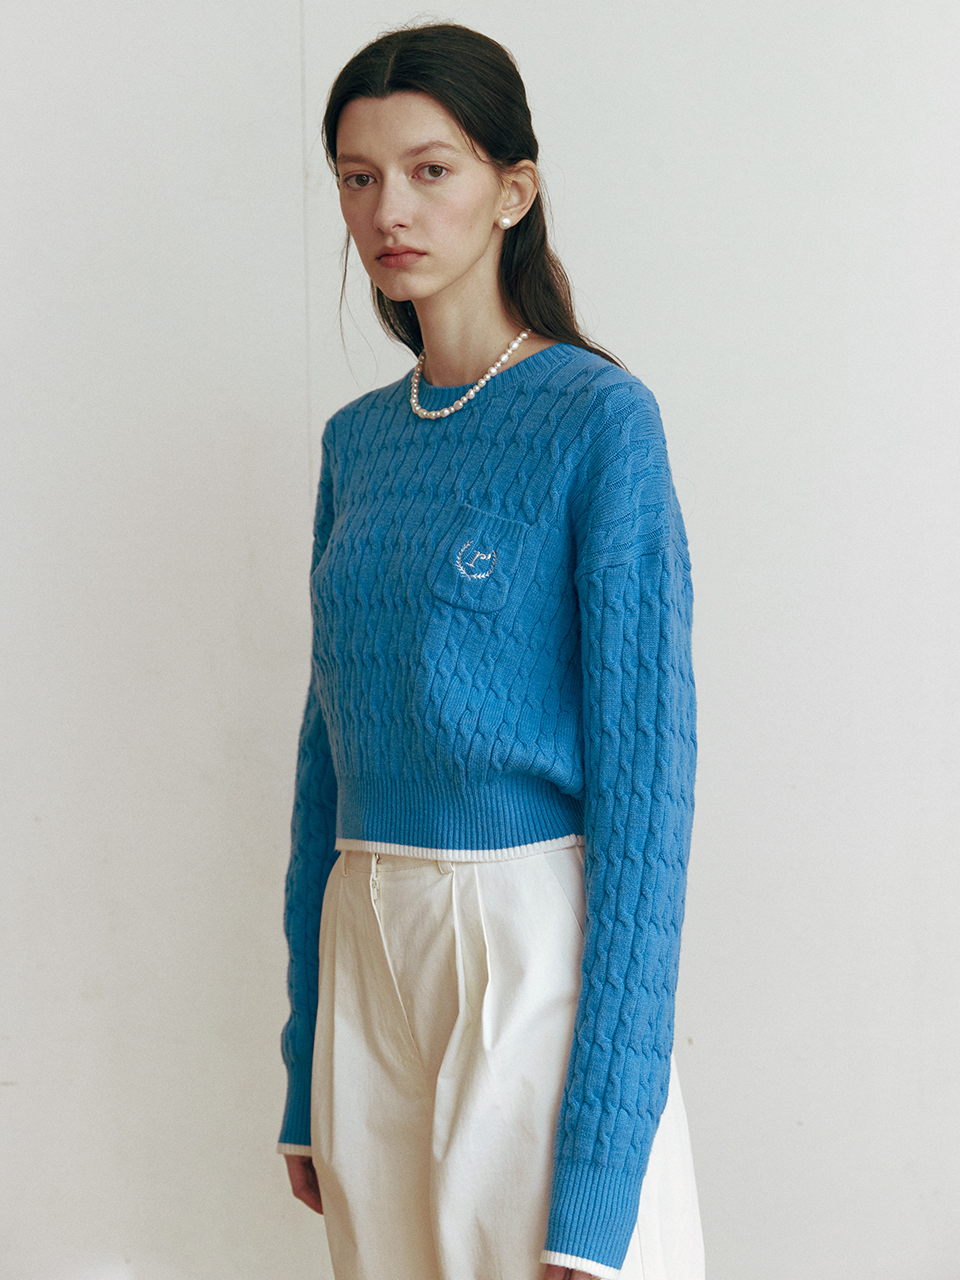 ROUND NECK CABLE KNIT BLUE